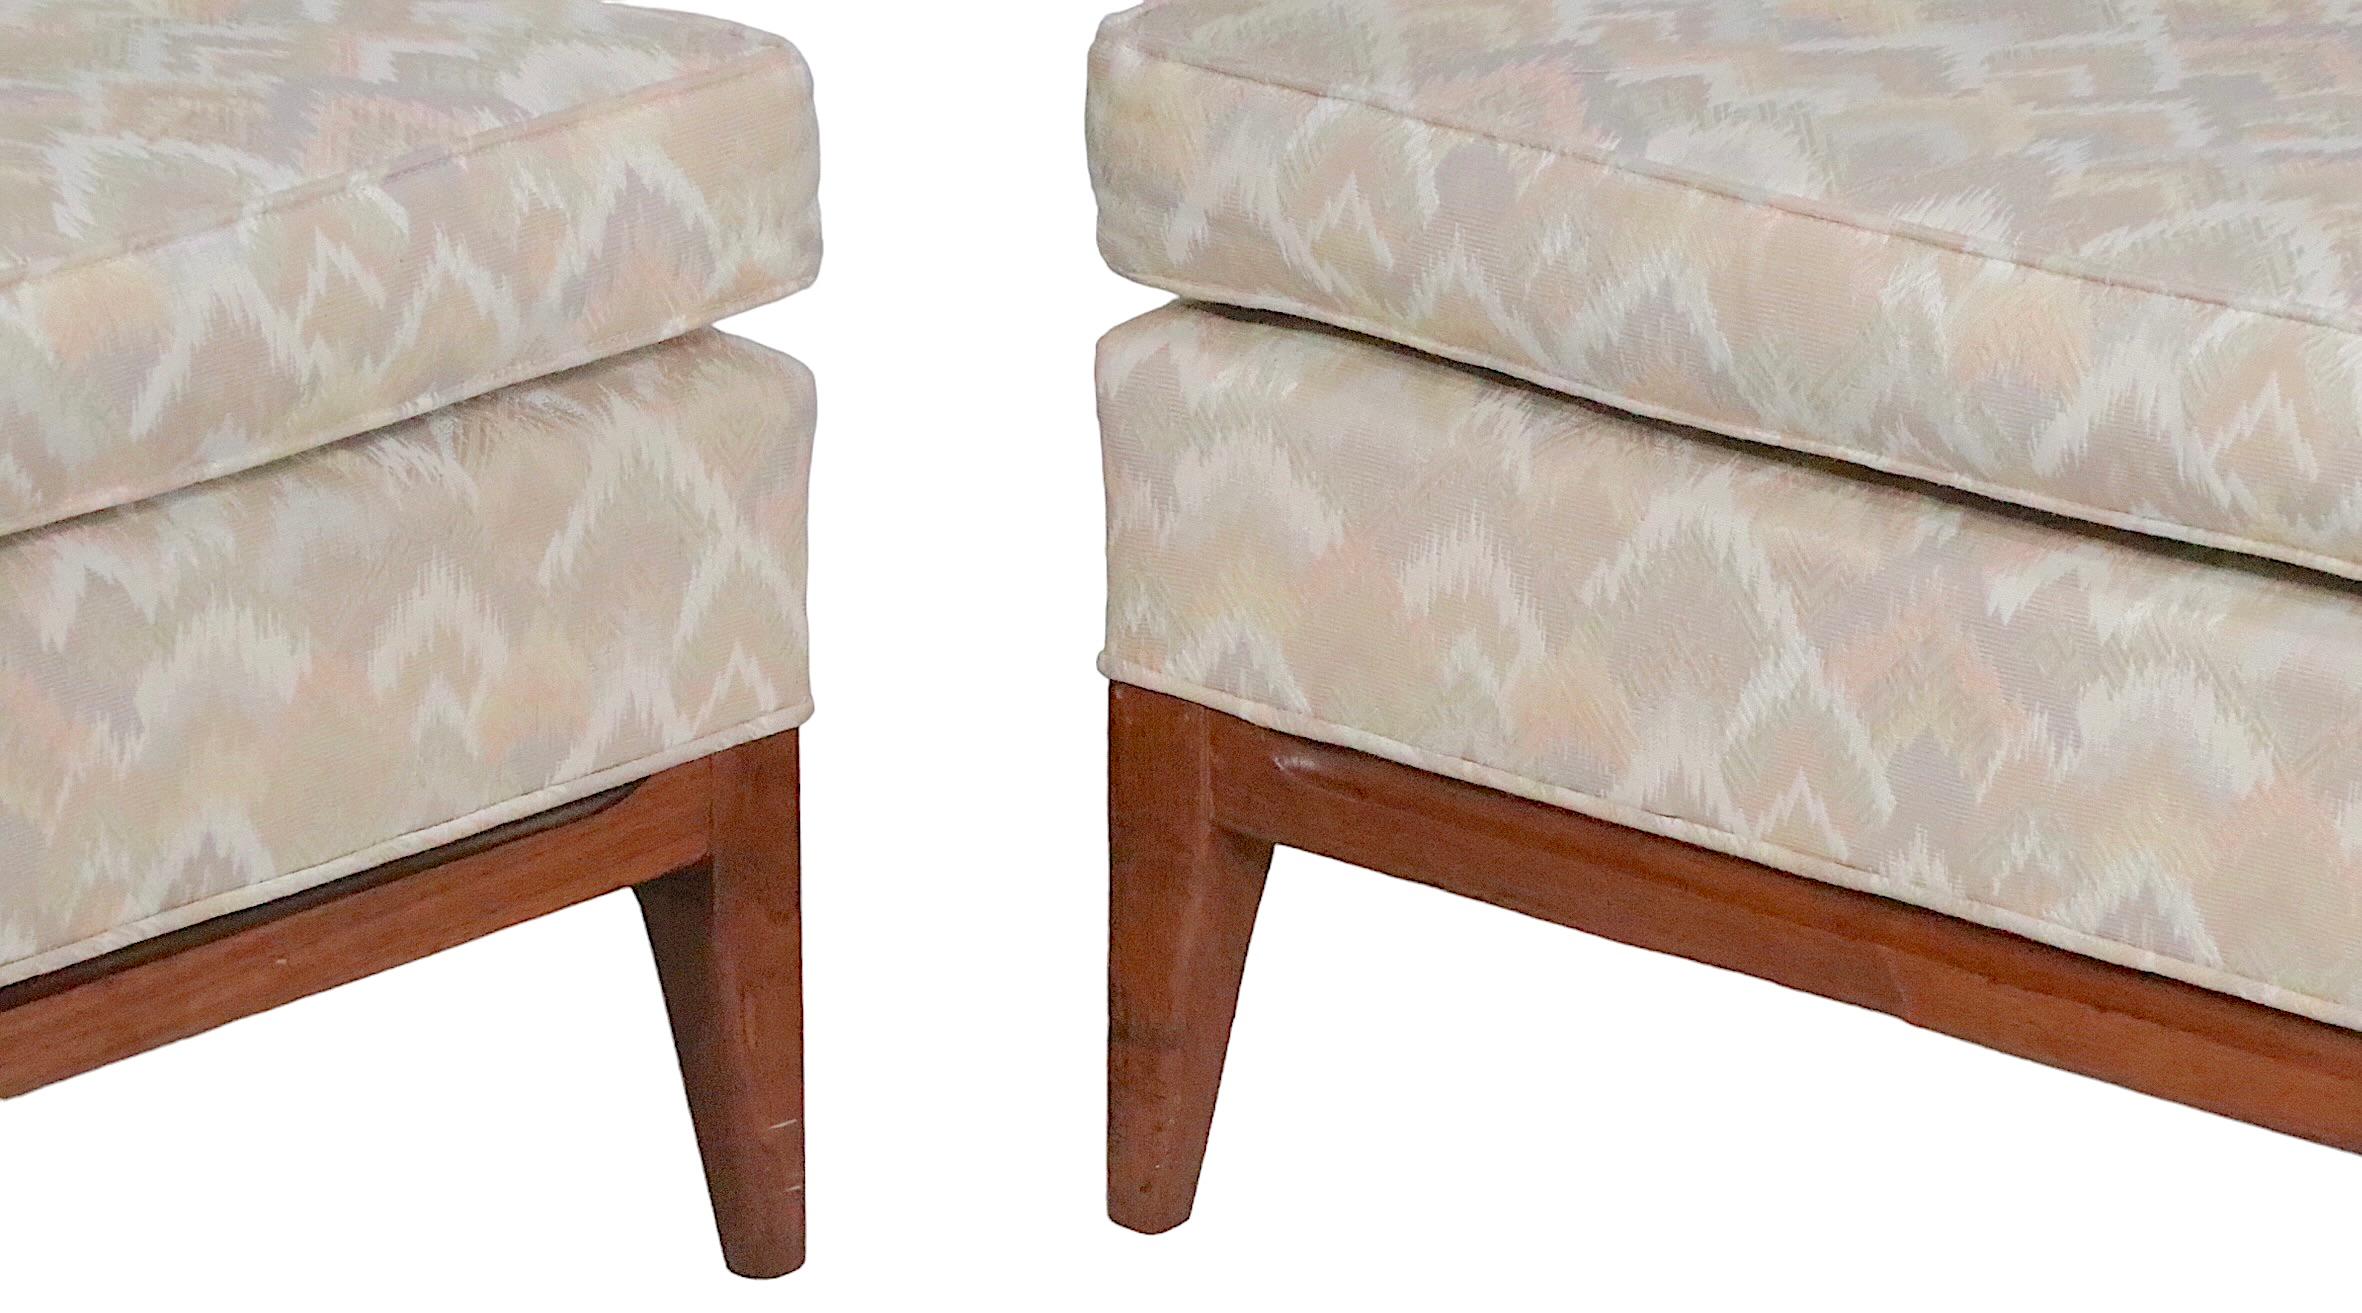 Pair. Mid Century Tub Chairs After Robsjohn Gibbings, circa 1950 - 1960s For Sale 7